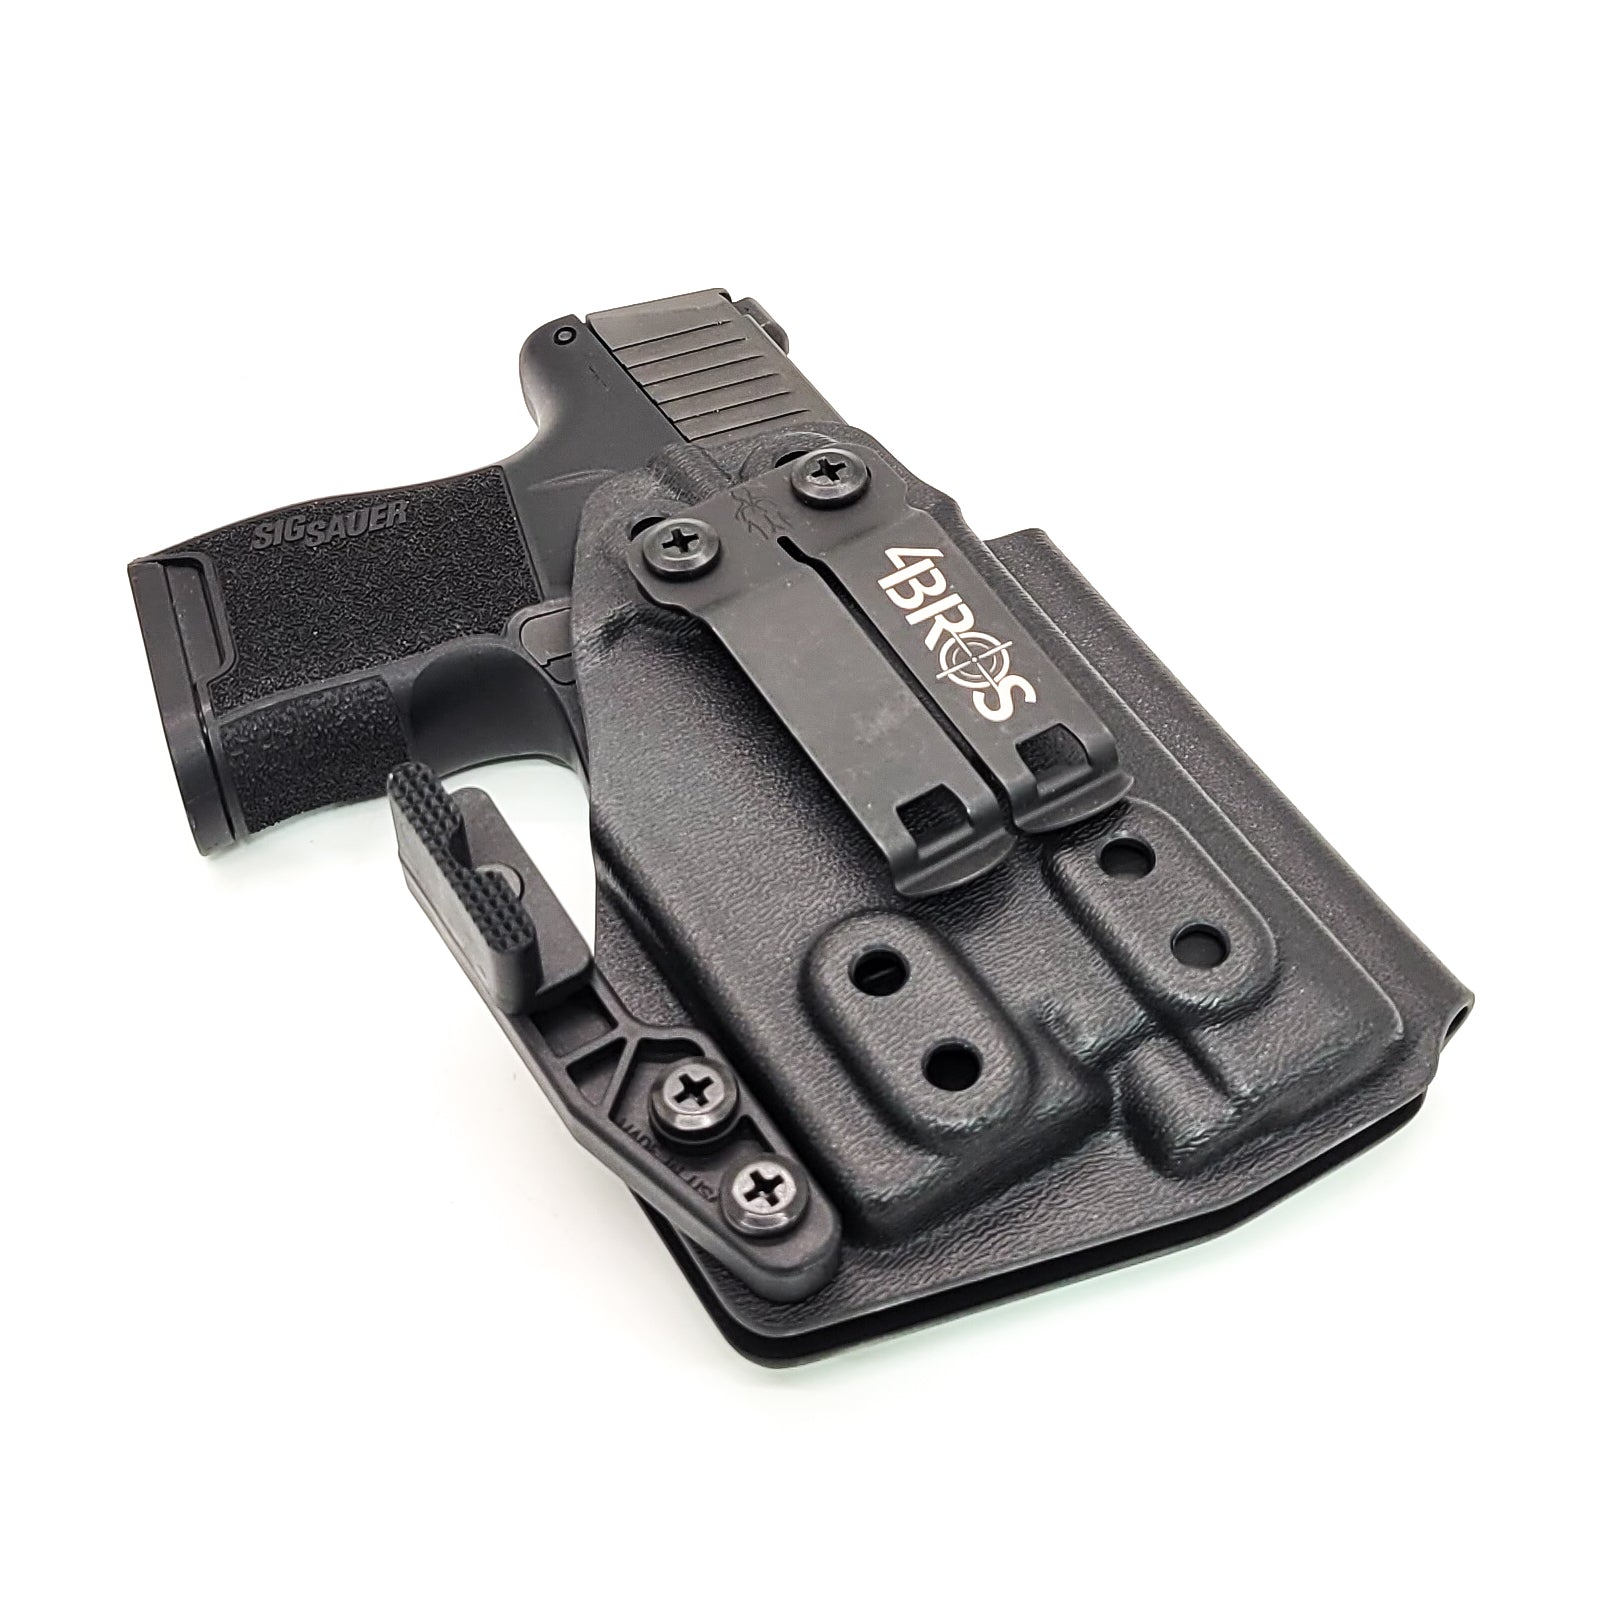 For the best, Inside Waistband IWB AIWB Kydex Holster designed to fit the Sig Sauer P365, 365XL, or 365 SAS with Nightstick TSM-13W weapon-mounted light, shop Four Brothers Holsters. Full sweat guard, adjustable retention, minimal material & smooth edges to reduce printing. Made in USA Cleared for red dot sights. 4Bros